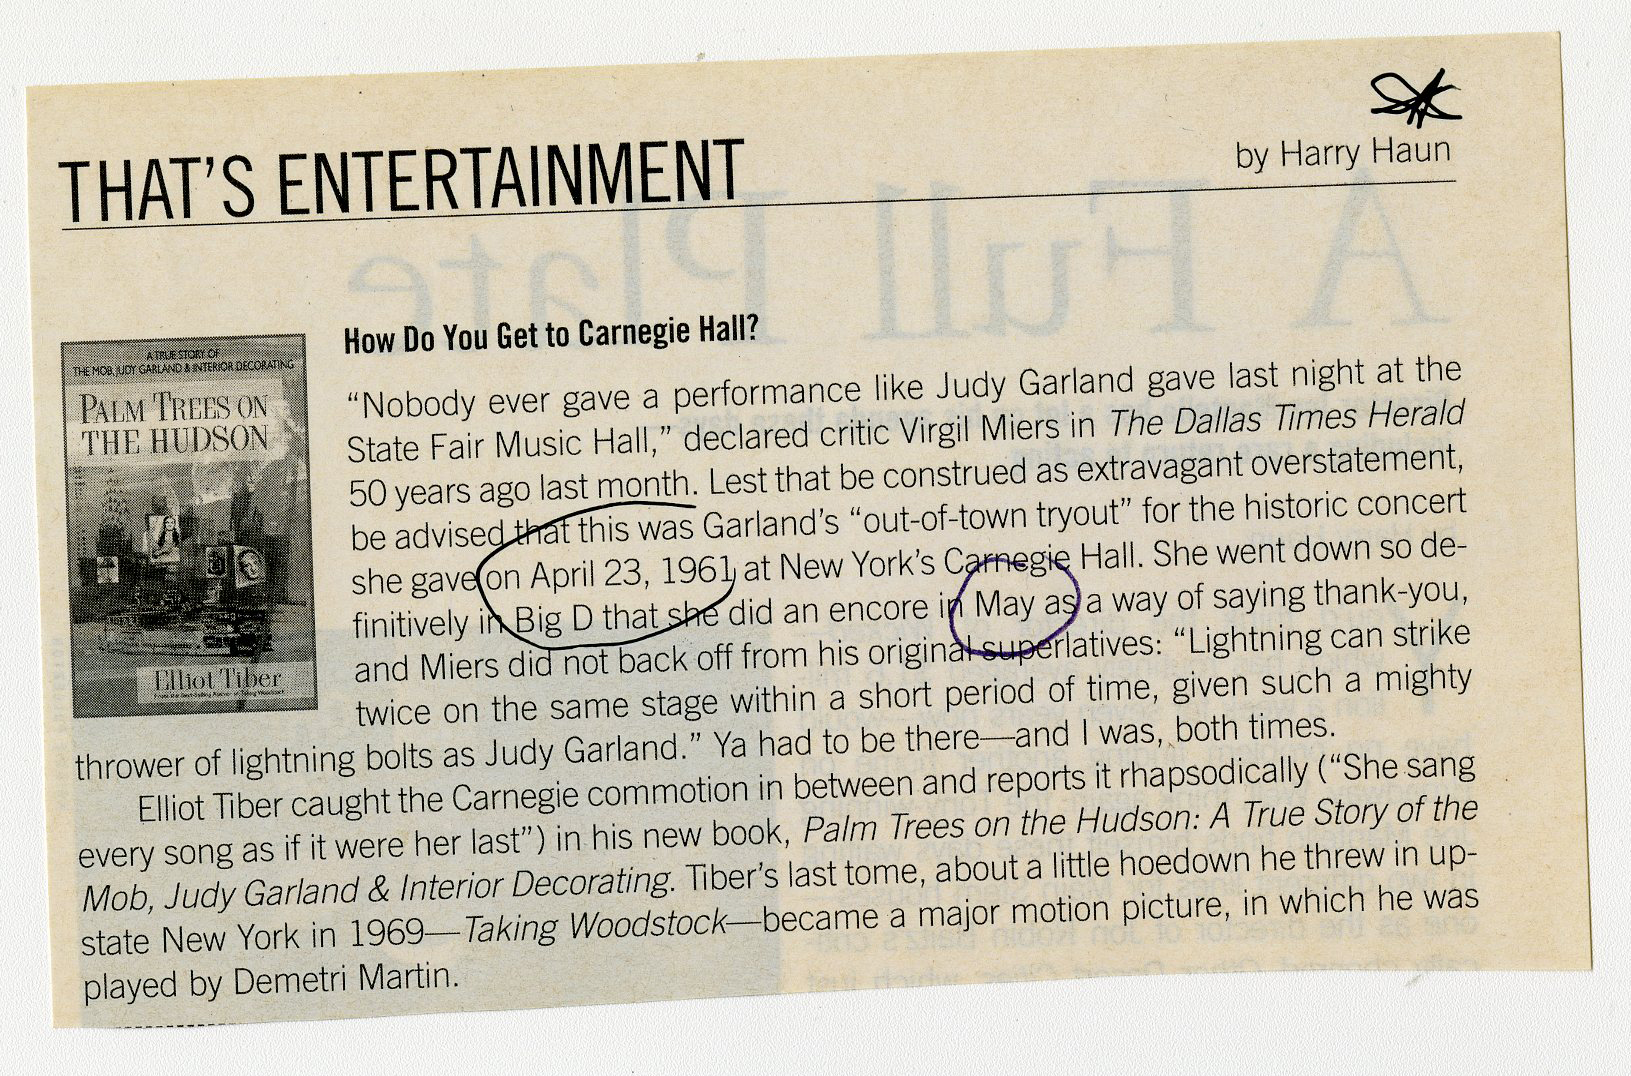 A magazine clipping entitled 'That's Entertainment' with information about the Judy Garland performance and a picture.